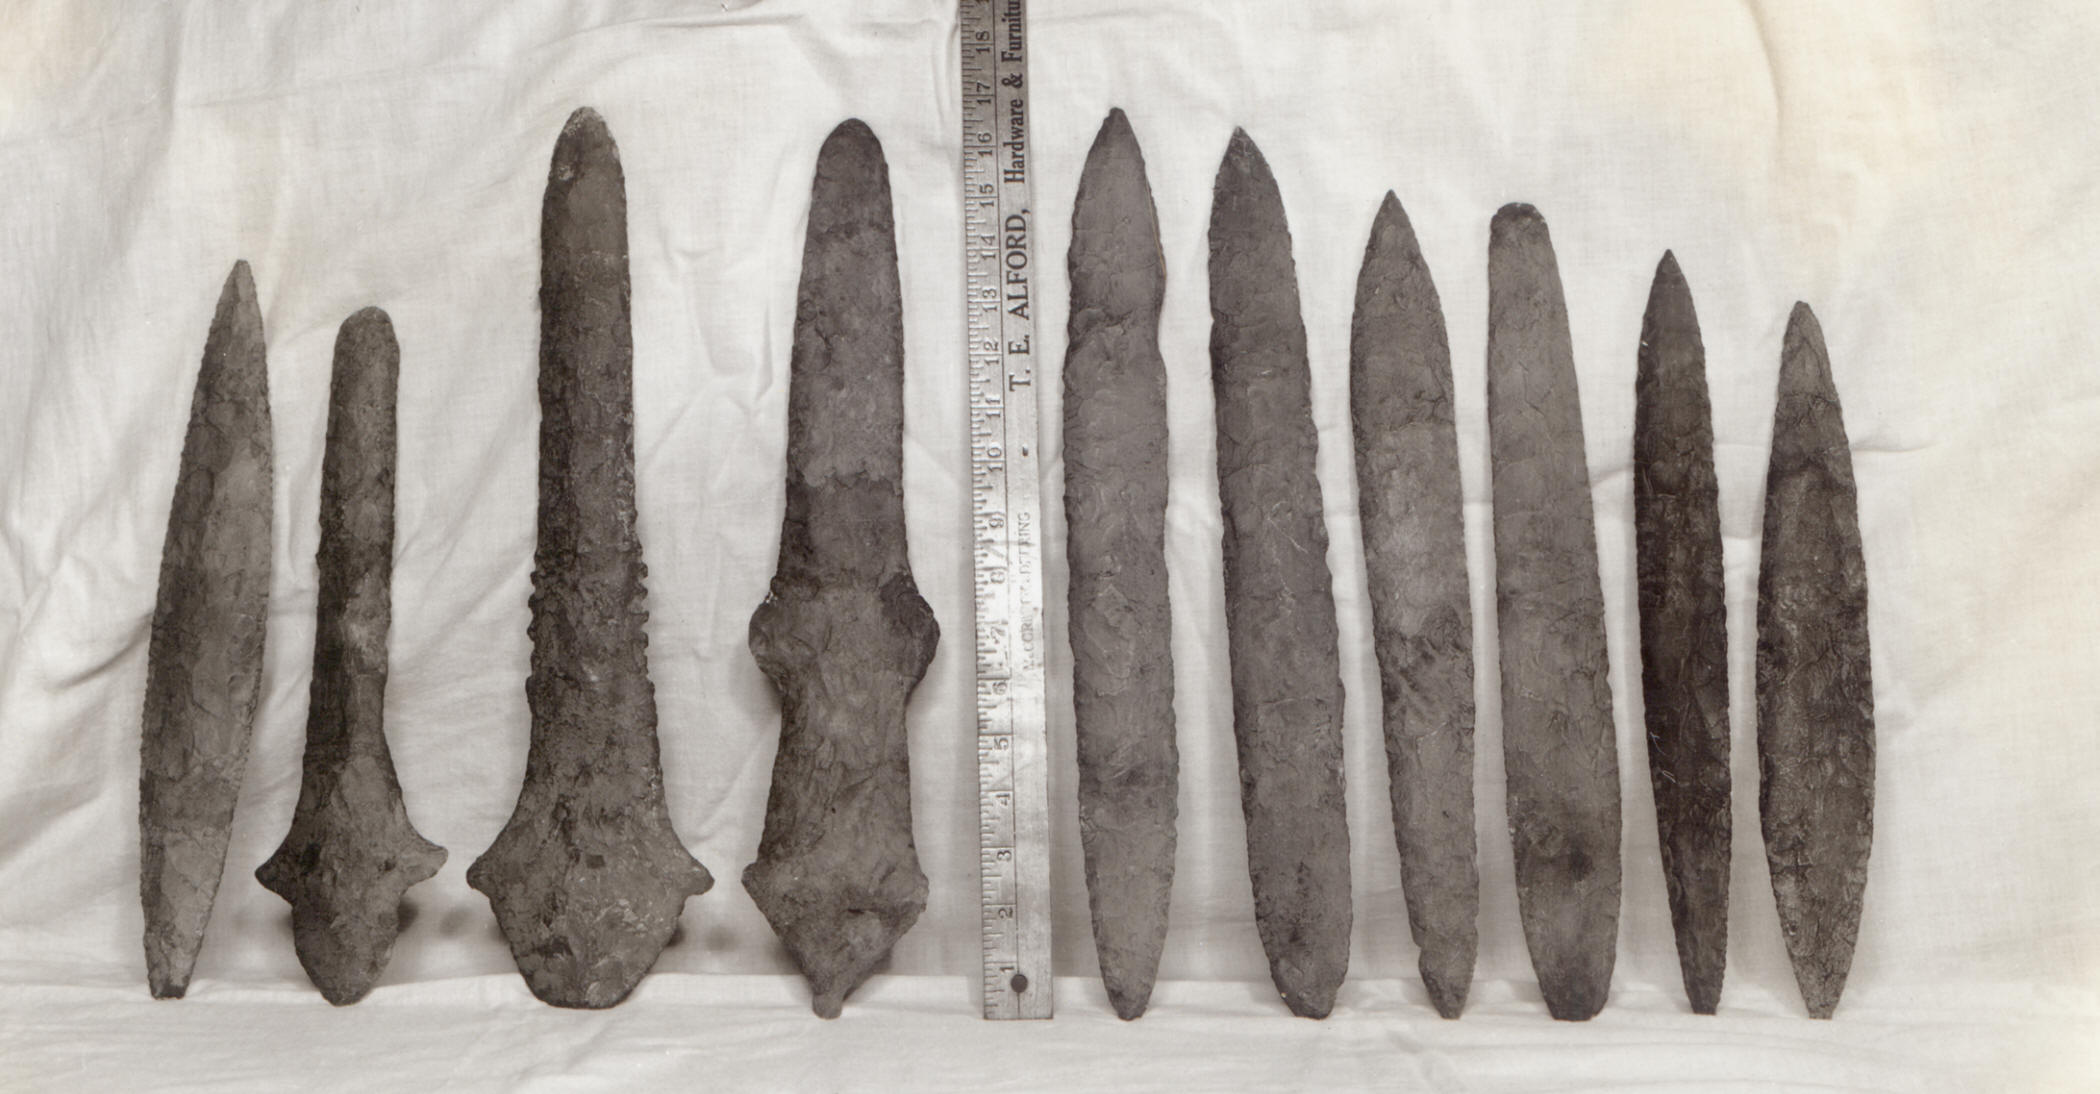 7 "swords" and 3 maces from Craig Mound, Spiro.